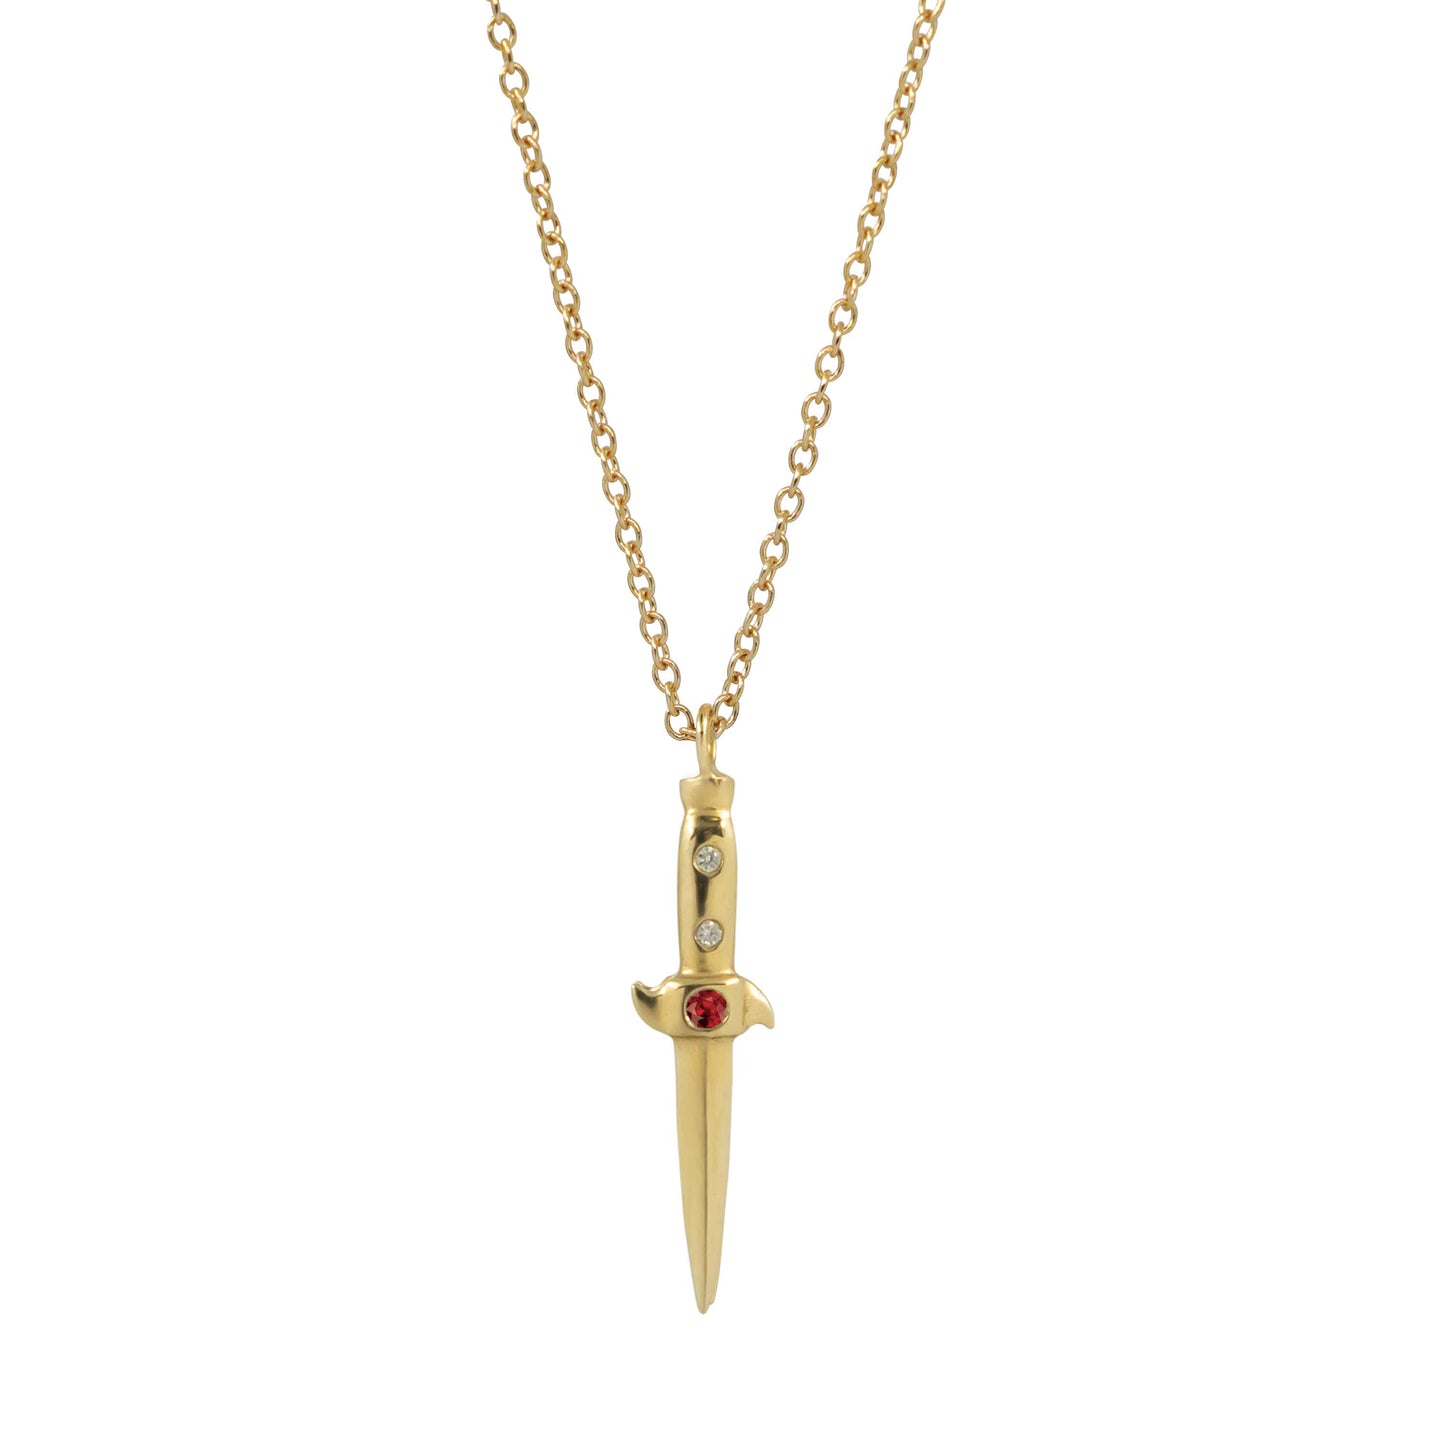 Switchblade Necklace - 14k Yellow Gold